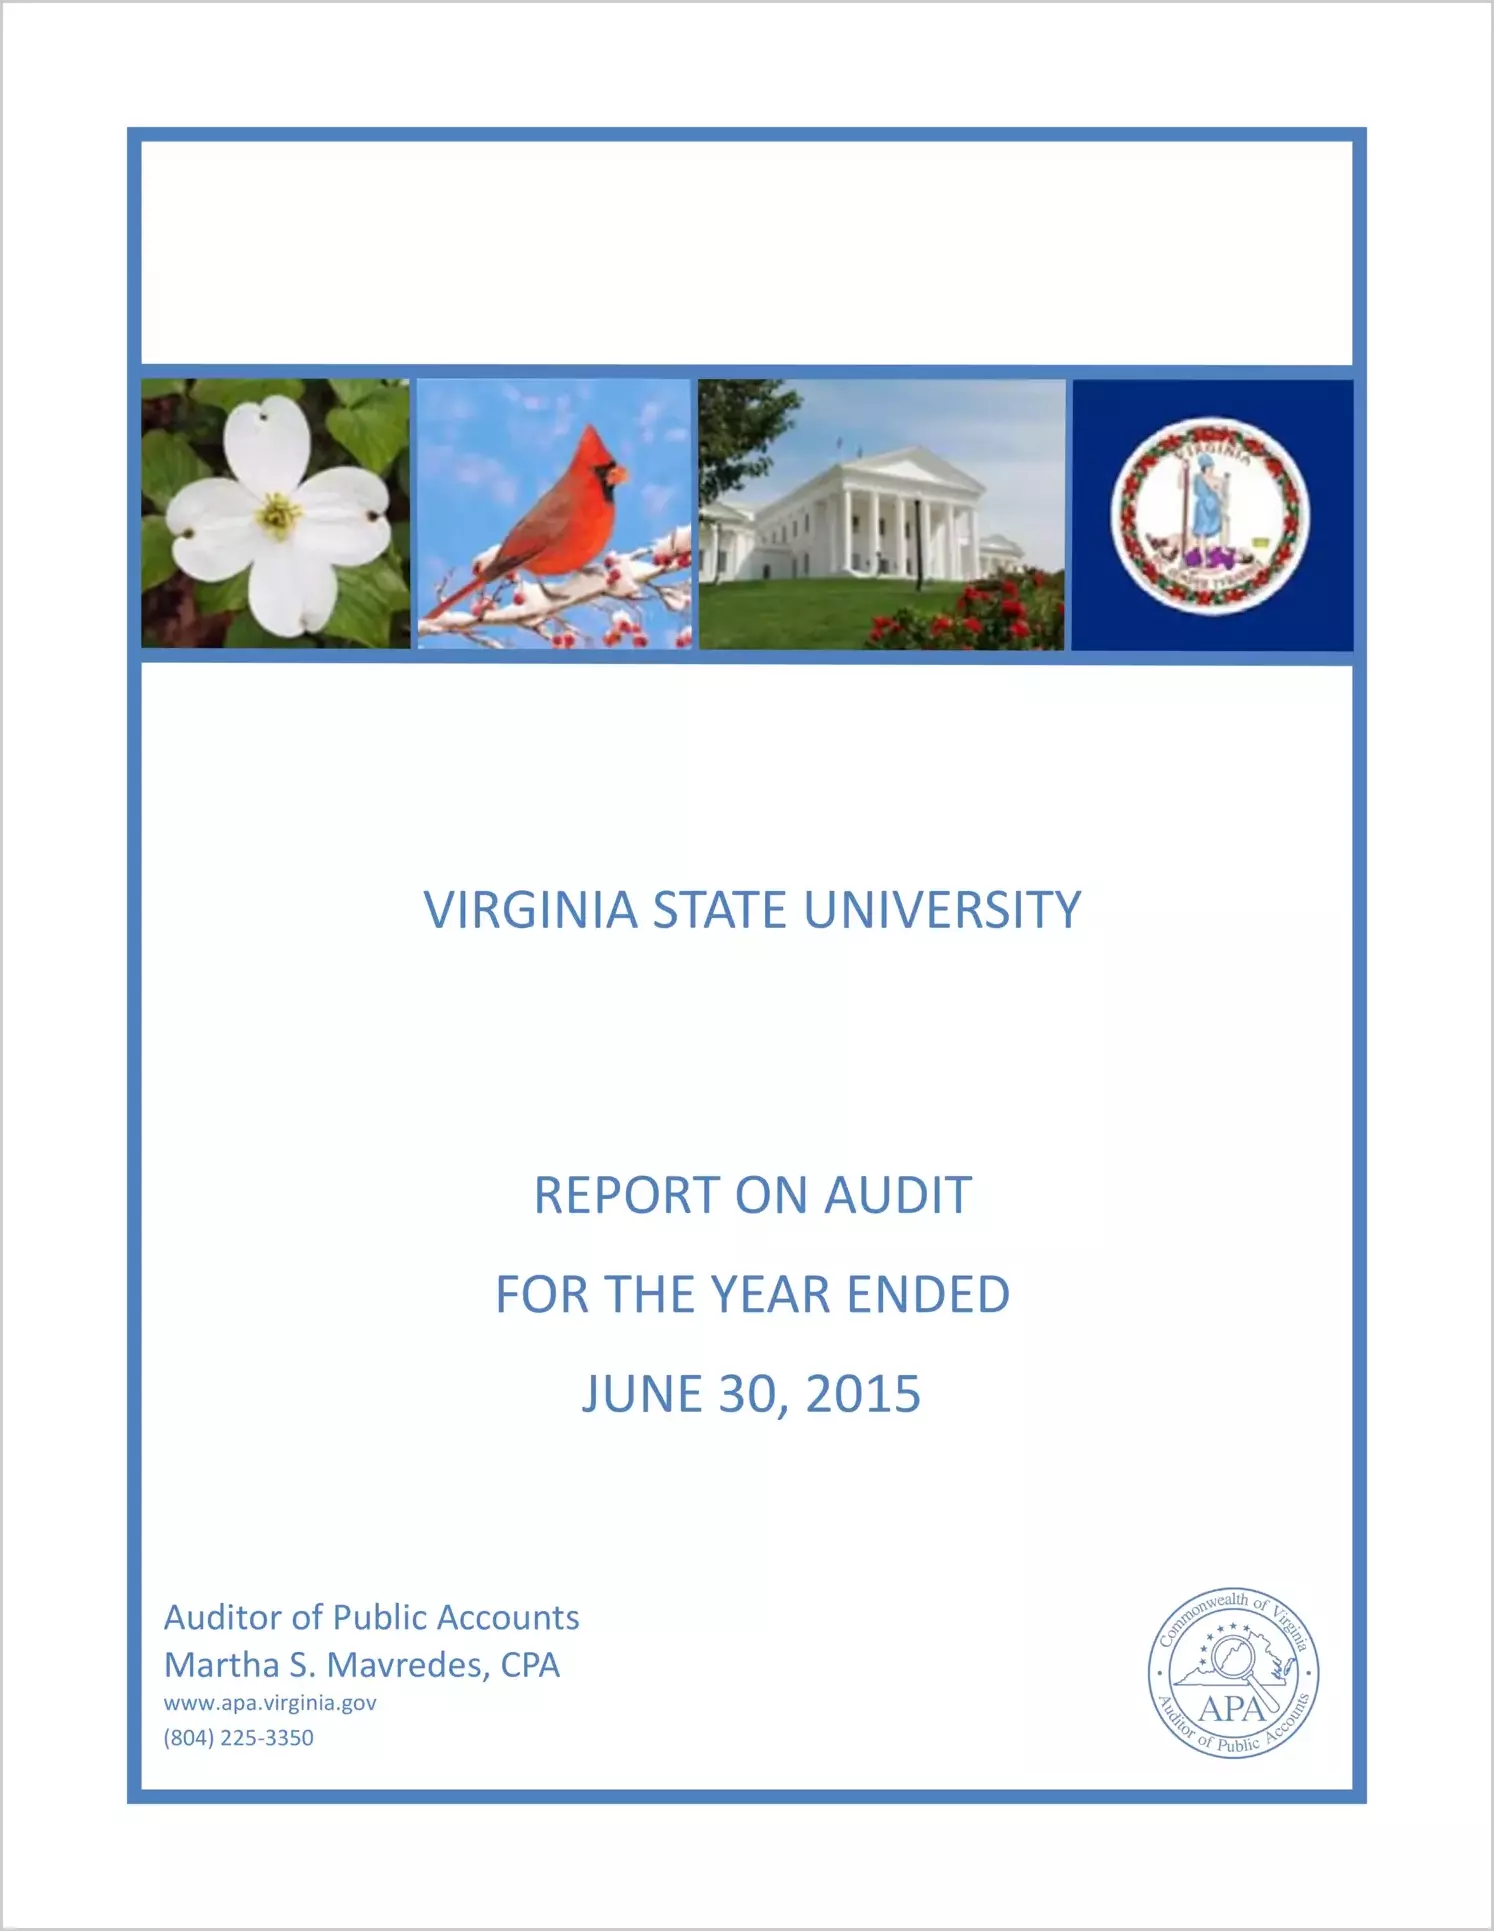 Virginia State University report on audit for the year ended June 30, 2015